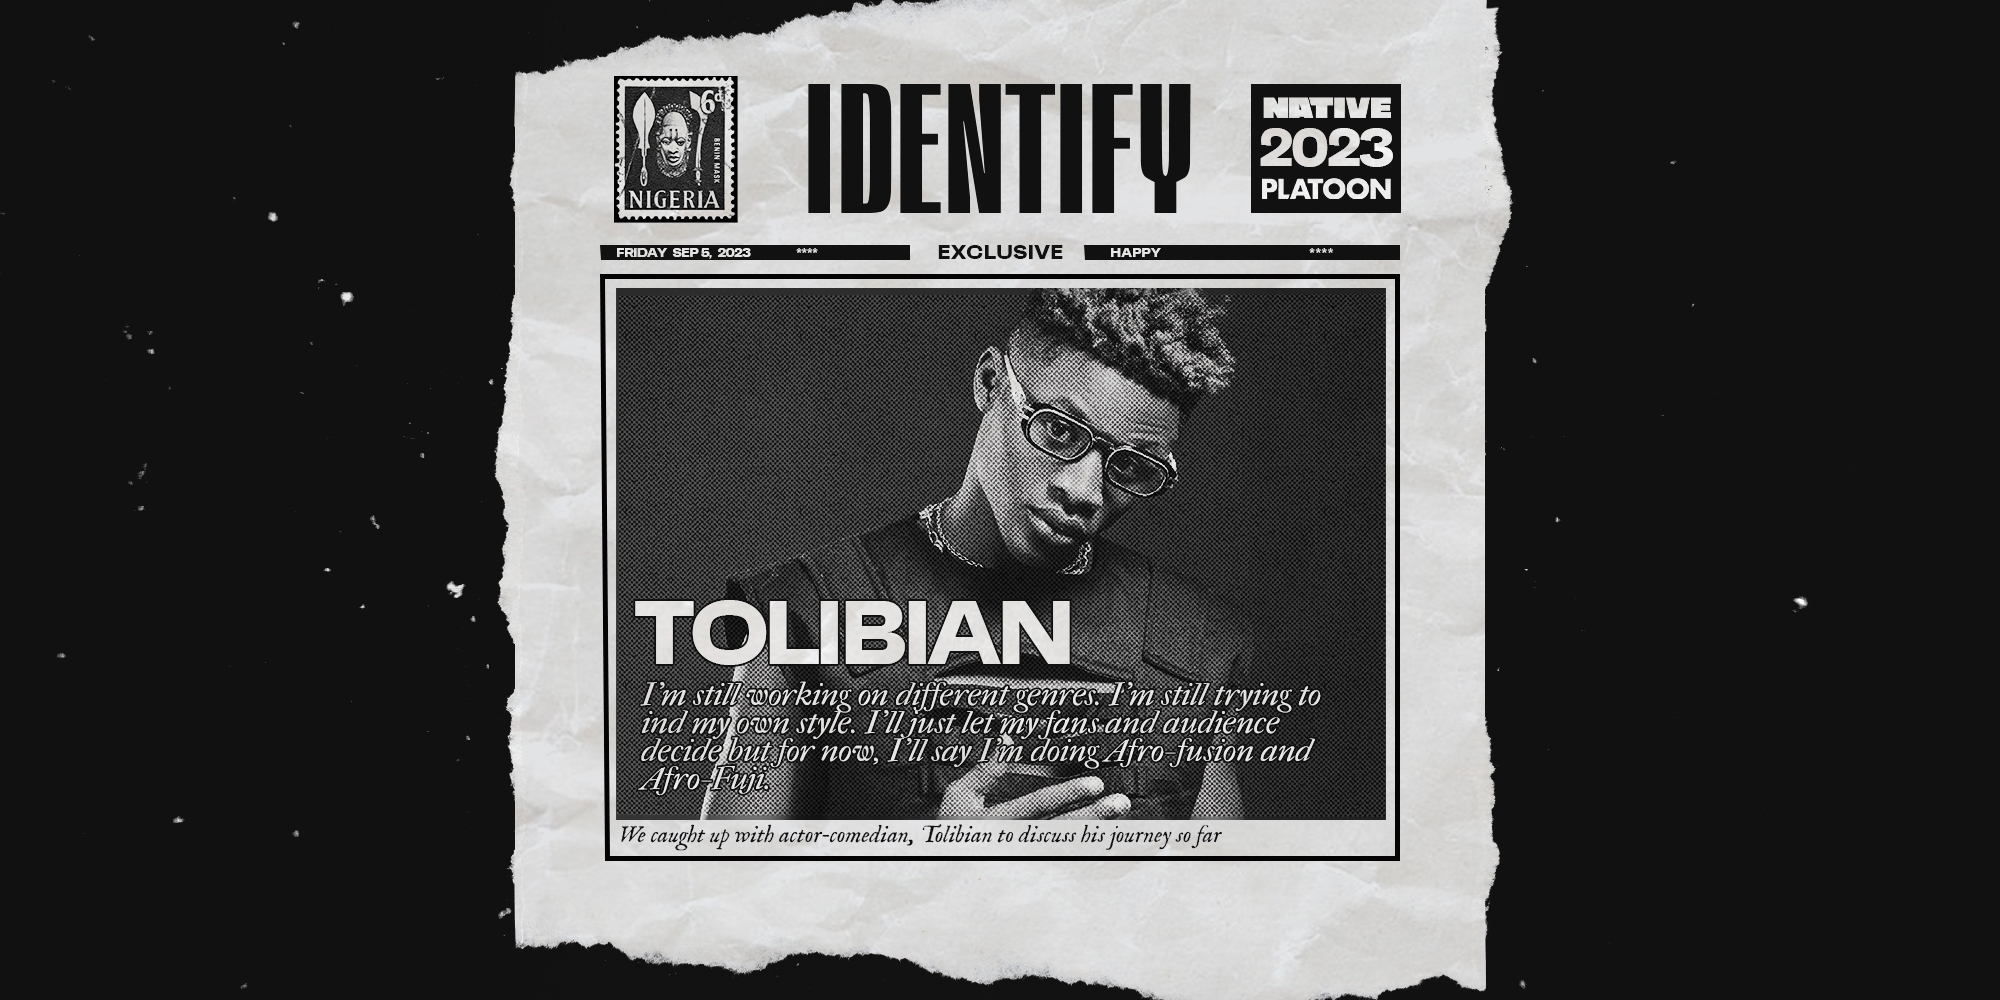 Identify: Tolibian wants to become a master of his craft